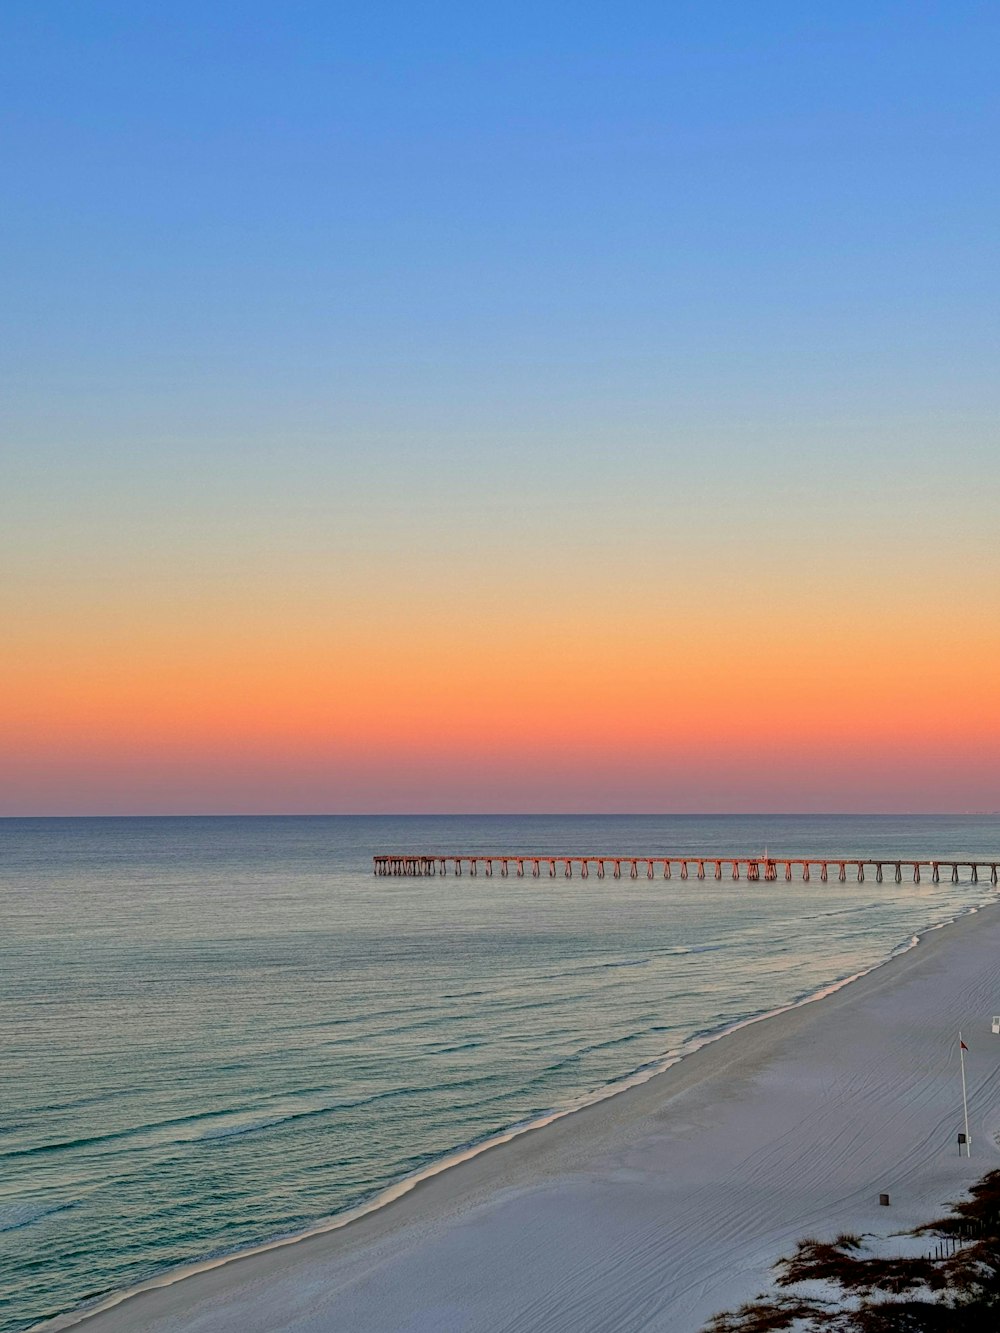 a view of a beach at sunset with a pier in the distance